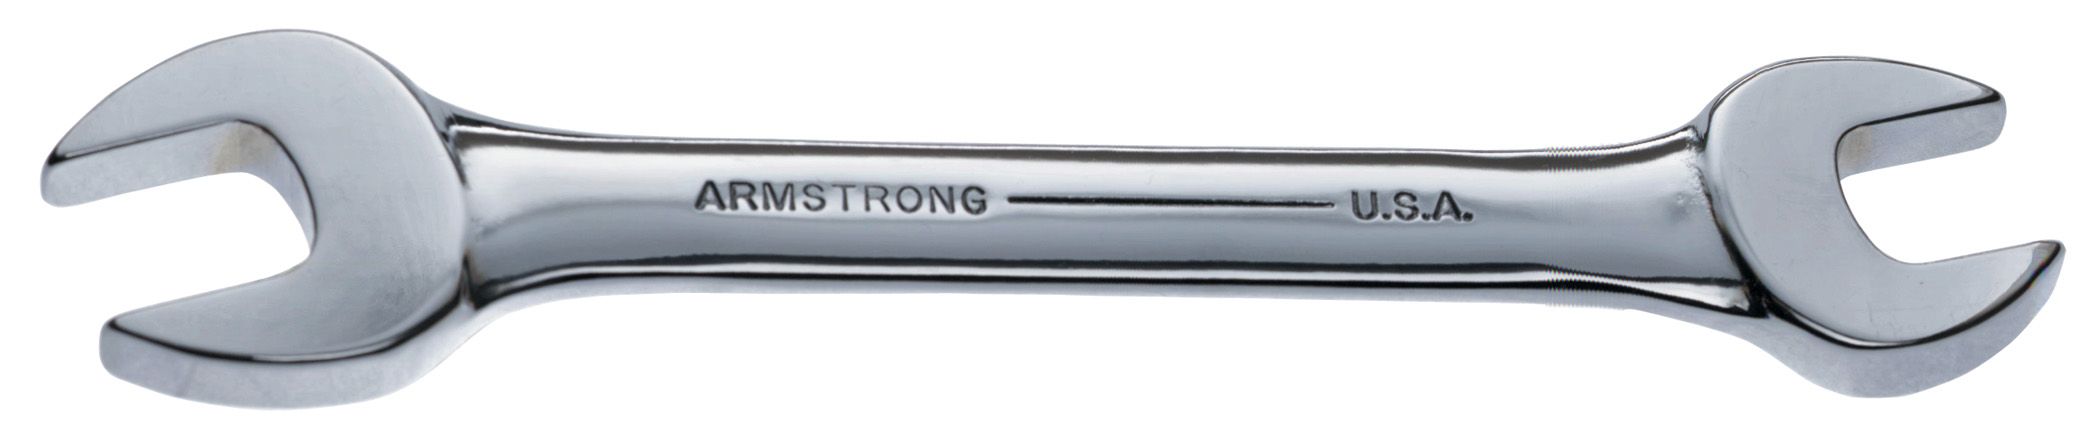 Armstrong 3/16 x 1/4 Full Polish Open End Wrench